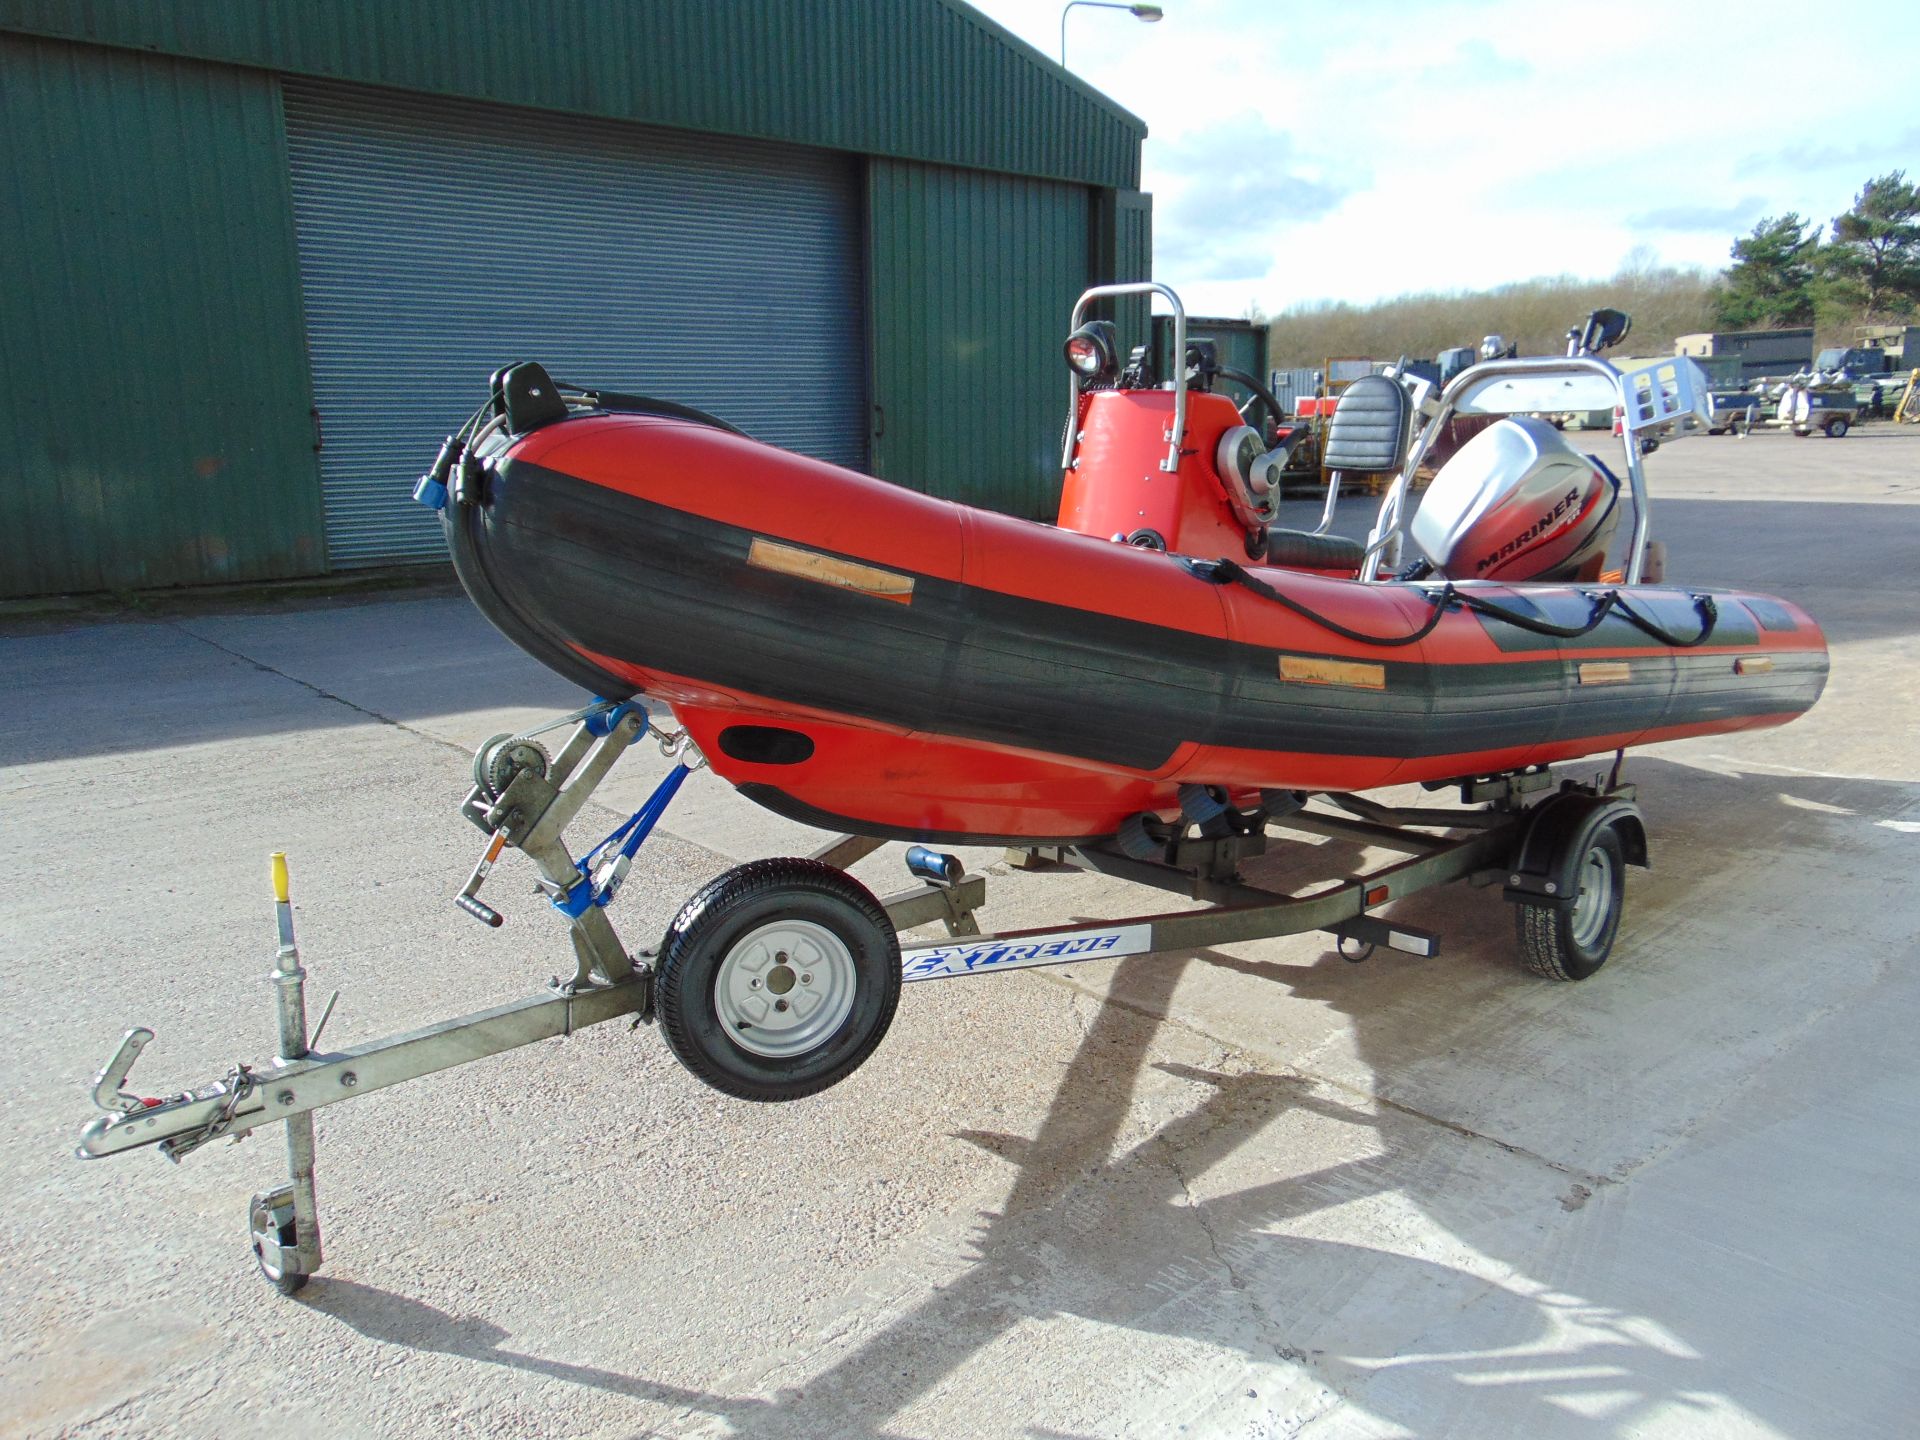 XS-Ribs 4.6M Inflatable w/ Mercury Mariner Four Stroke EFI 60HP Outboard Motor on Trailer. - Image 7 of 57